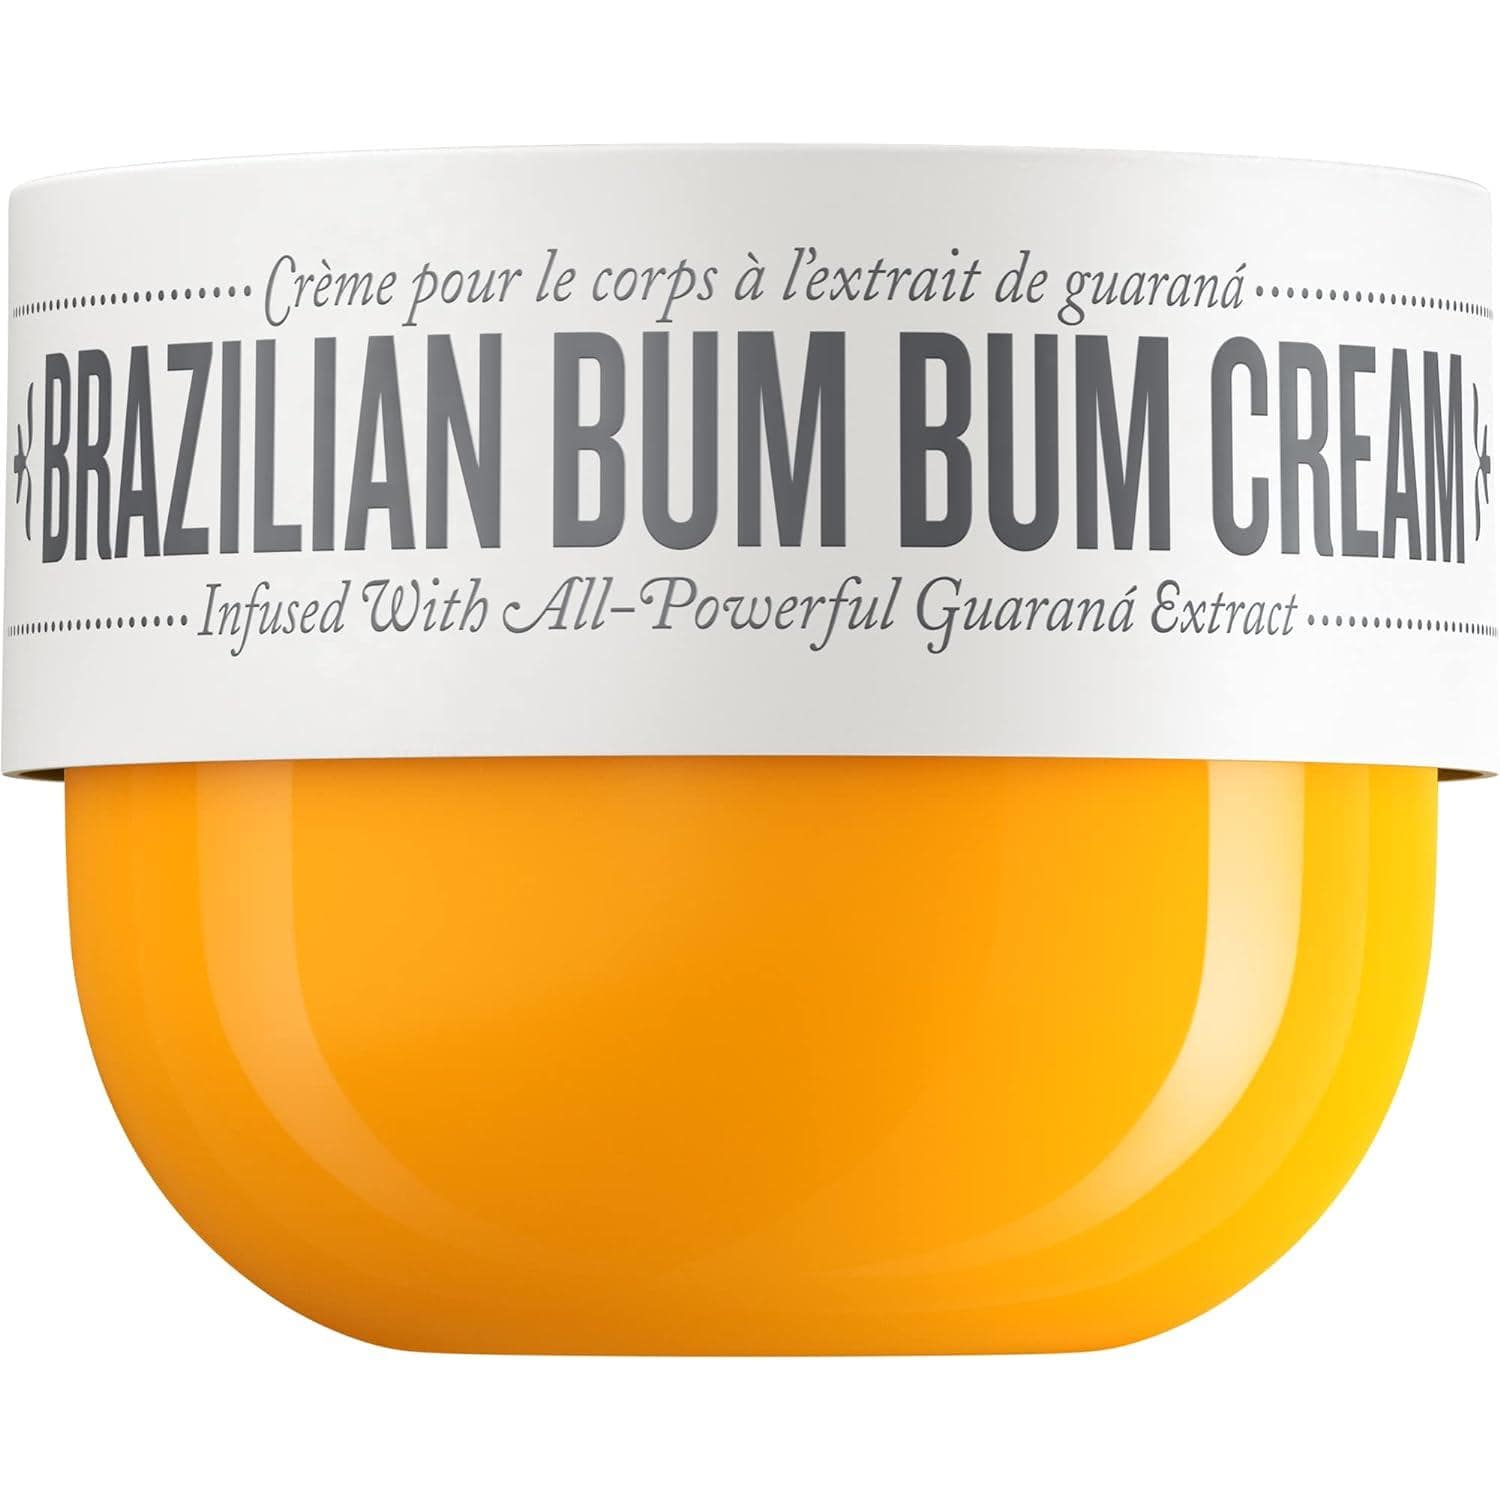 With this cream, you experience the best of both worlds - skin hydration and a sweet, tropical aroma, the essence of Scented Body Lotions.